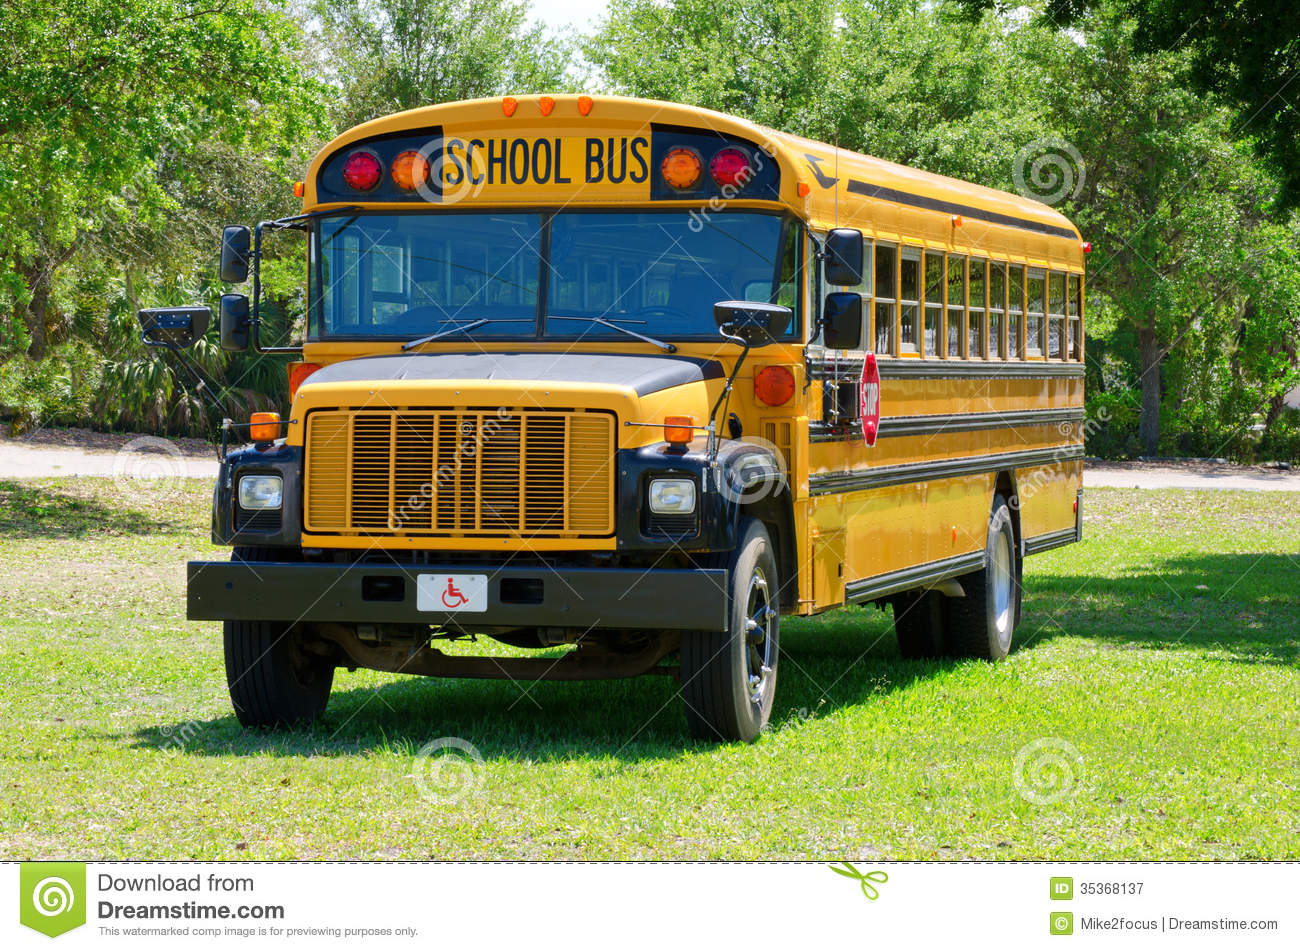 Summer Camp School Bus In Grass Field Royalty Free Stock Photography